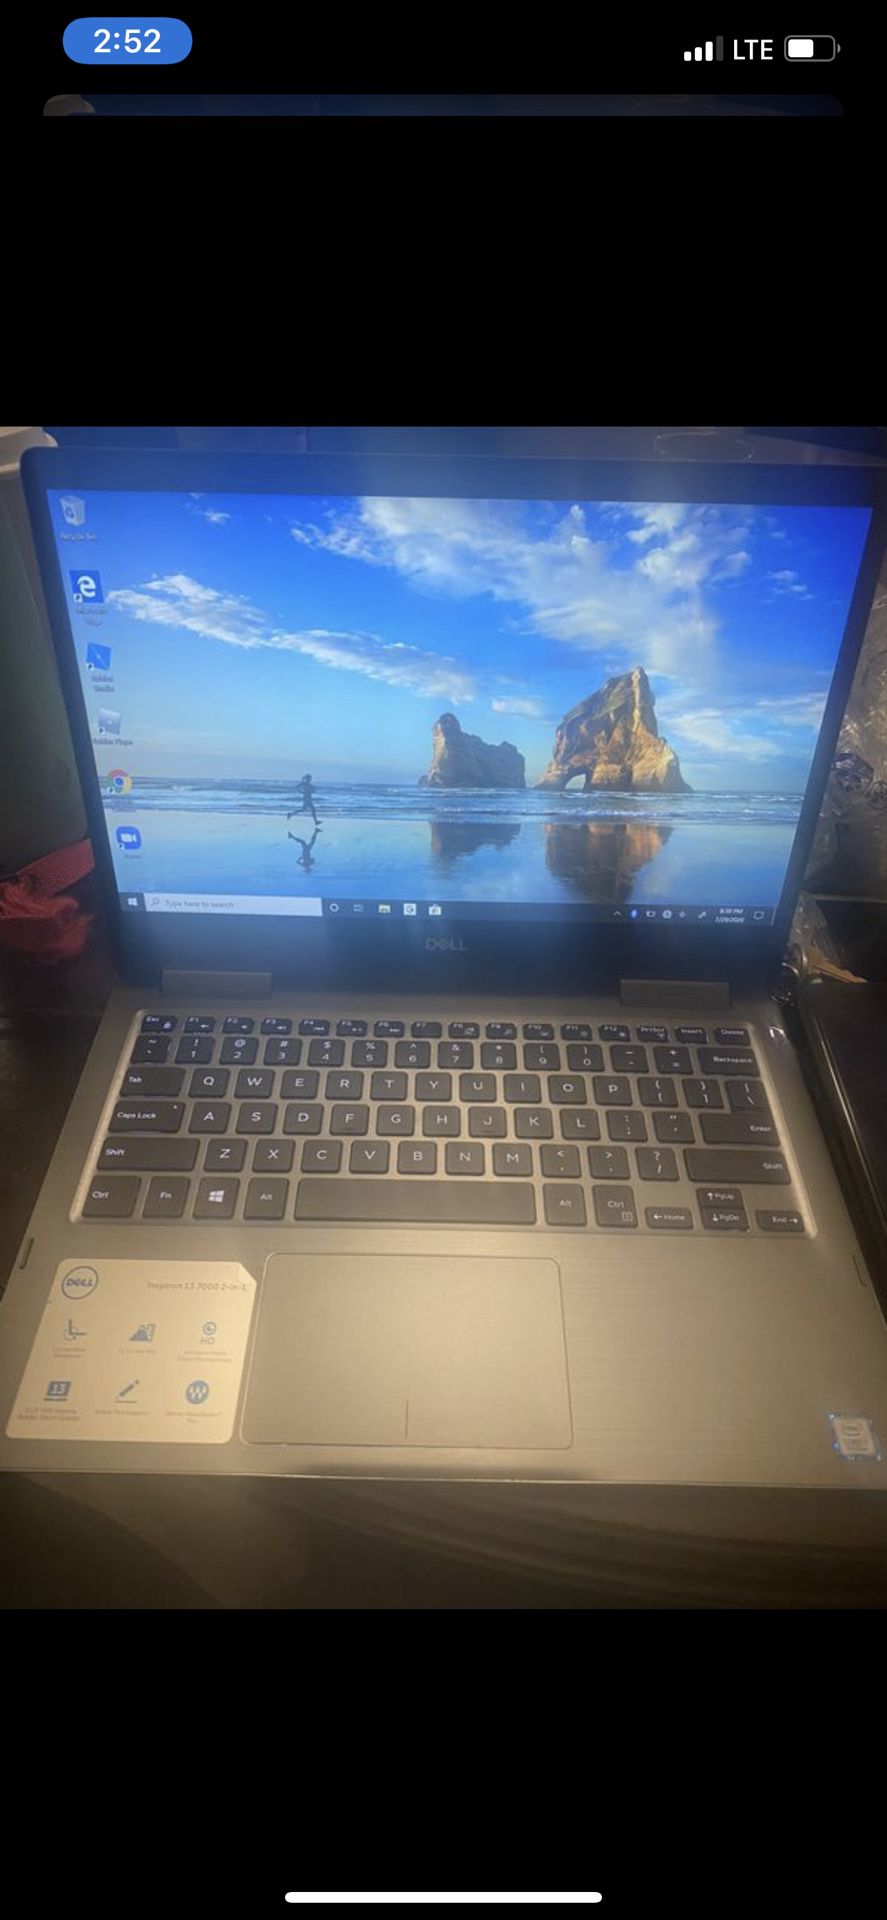 Dell Inspiron 13 7000 2-in-1 laptop